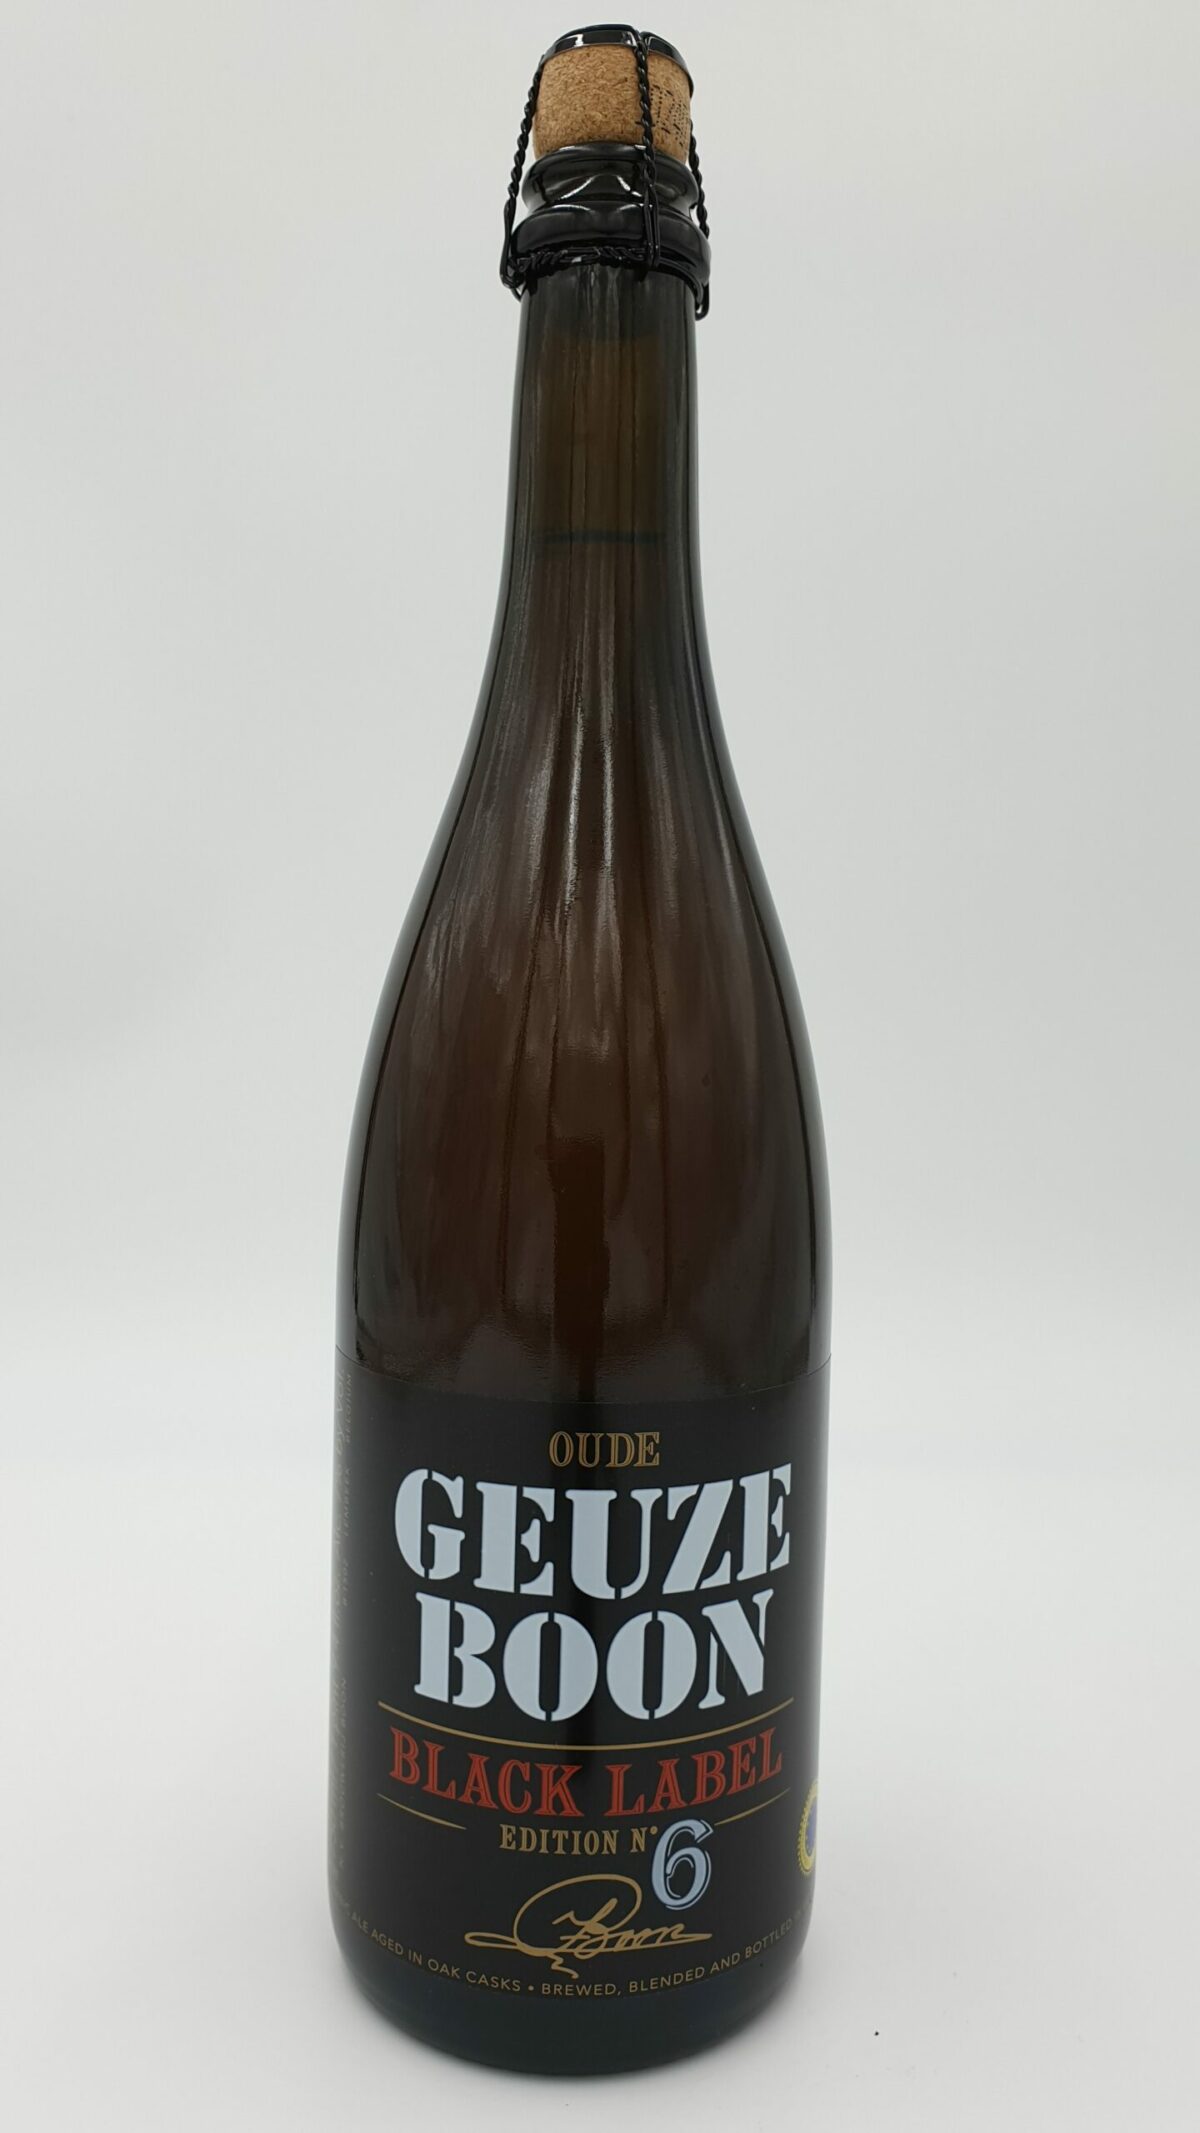 boon oude geuze black label edition 6